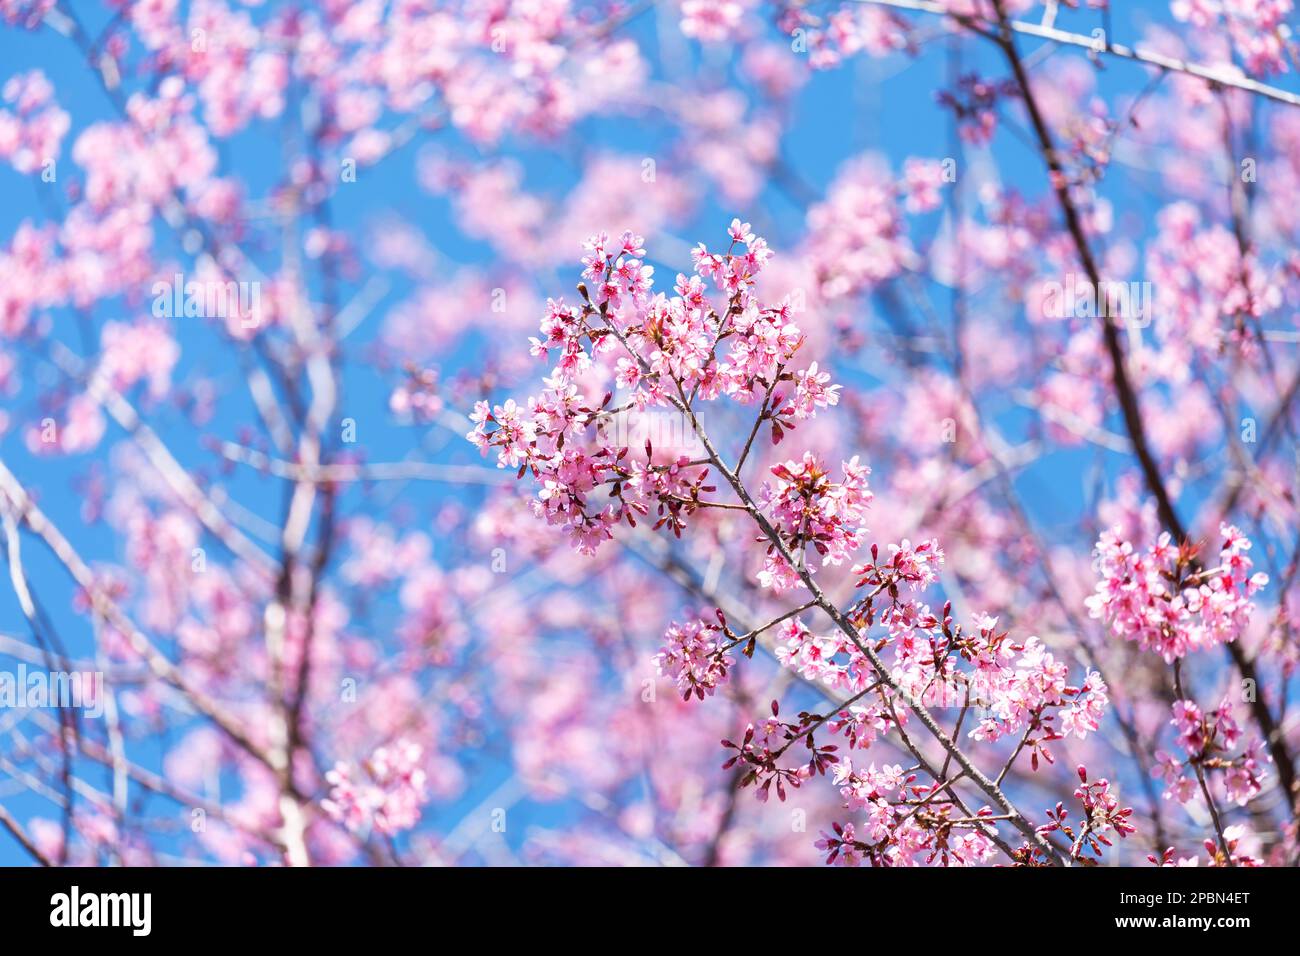 Pink blossom with blue sky background. Branches of wild Himalayan cherry (Prunus cerasoides) with vibrant pink cherry blossoms on their branches on bl Stock Photo